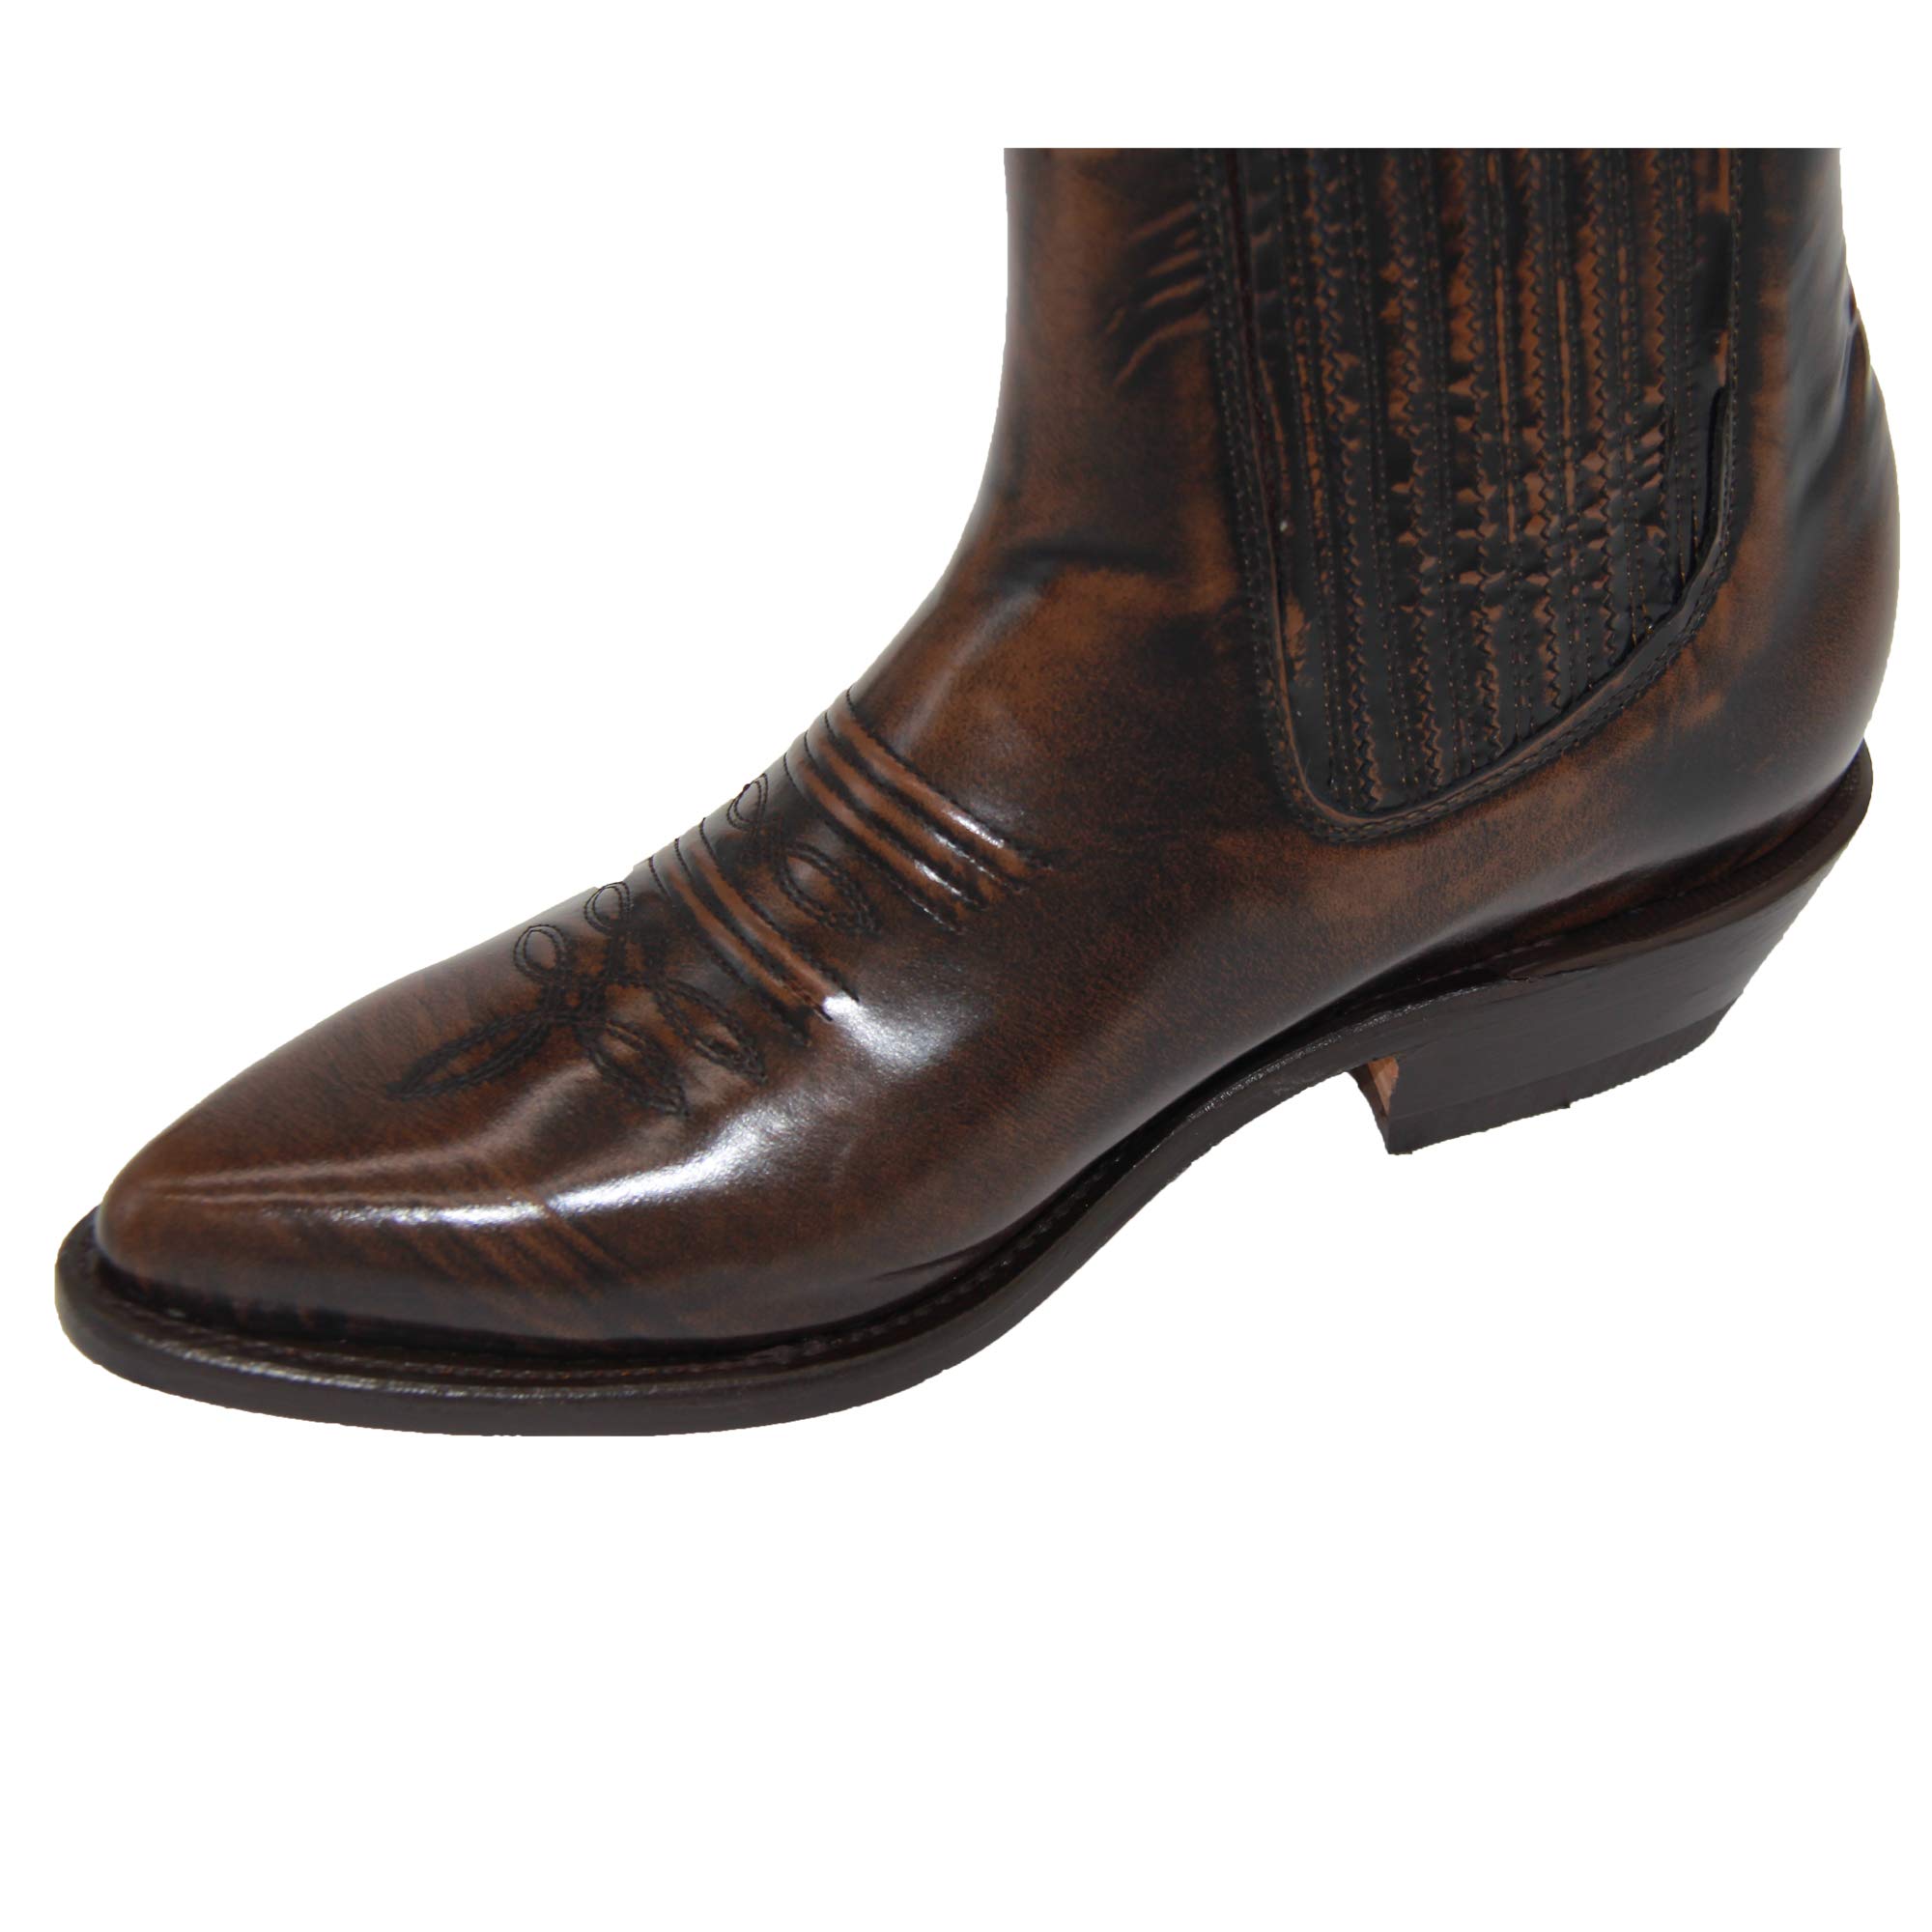 The Western Shops Men's Genuine Leather Short Ankle Cowboy, Charro Botin - image 5 of 5